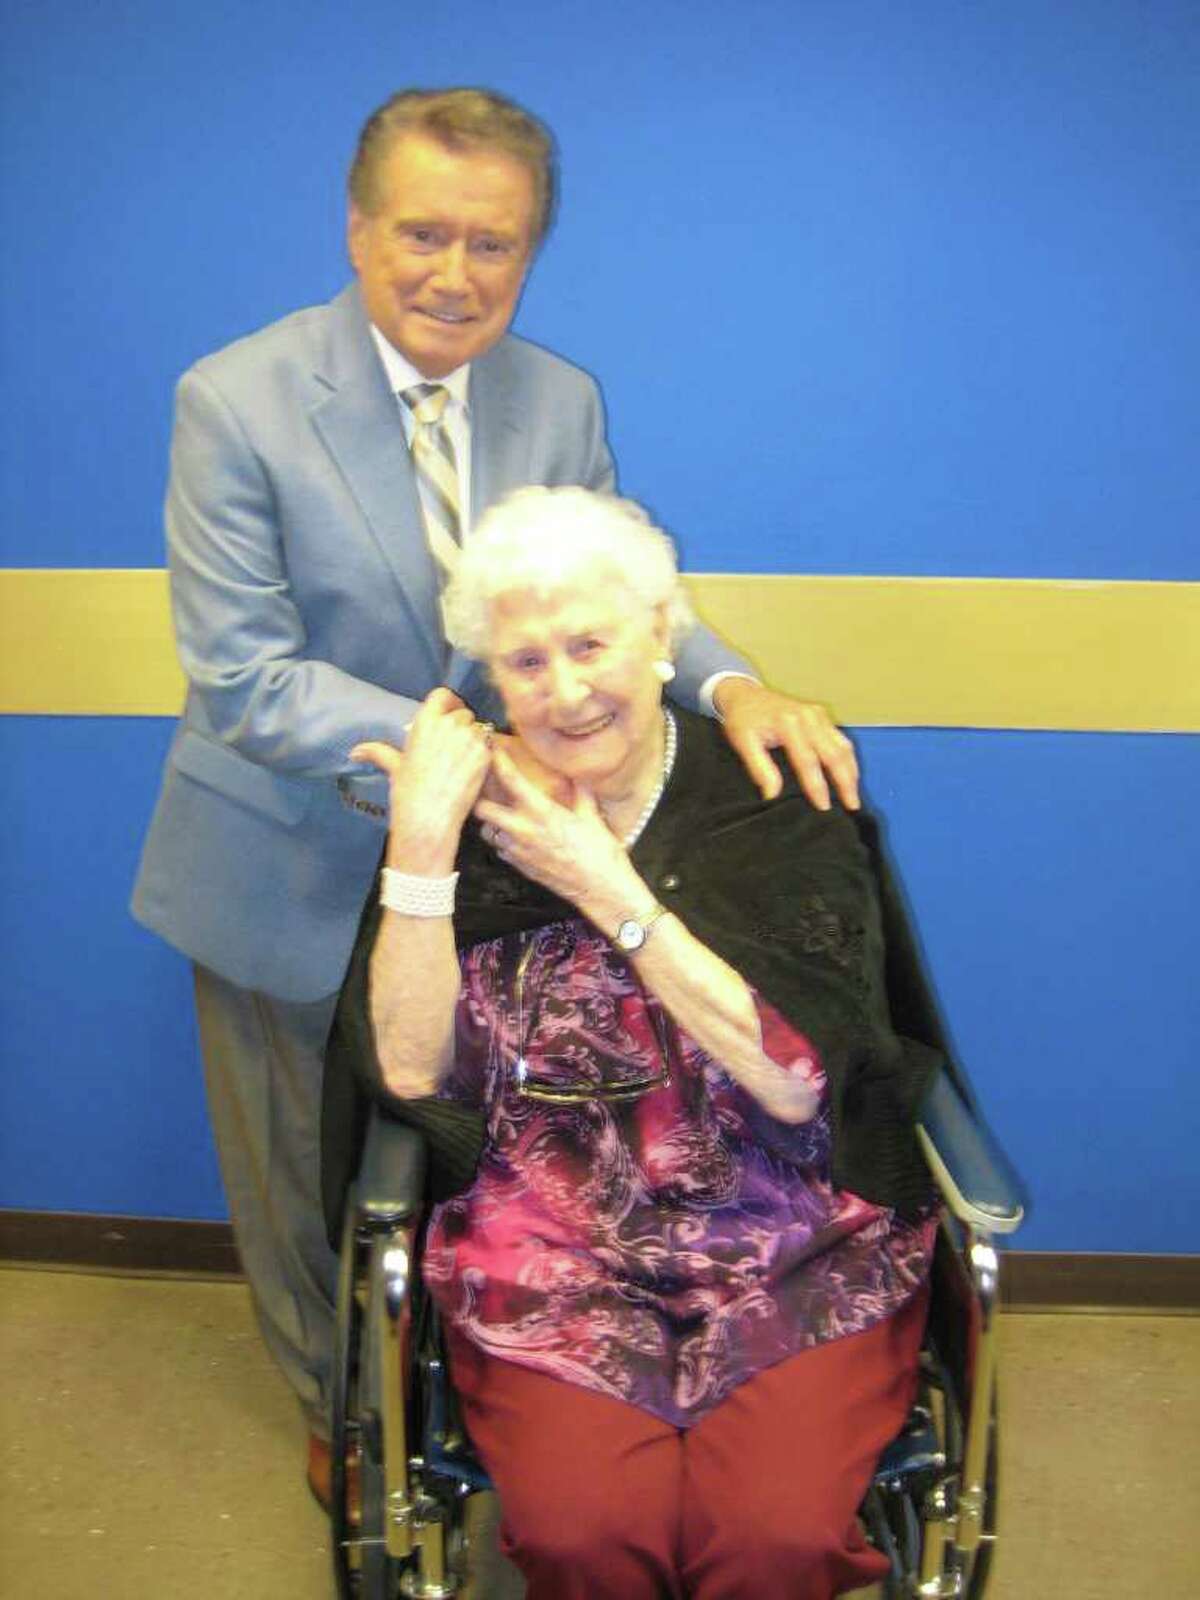 Nathaniel Witherell nursing home resident Helen Weisner meets fellow Greenwich resident Regis Philbin at the ABC studios in New York City on Wednesday, June 1, 2011. In April, the Greenwich police union won tickets to a taping of "Live! With Regis and Kelly," in a raffle that benefitted the nursing home, and the officers decided to invite Weisner, 96, who had picked the winning ticket.